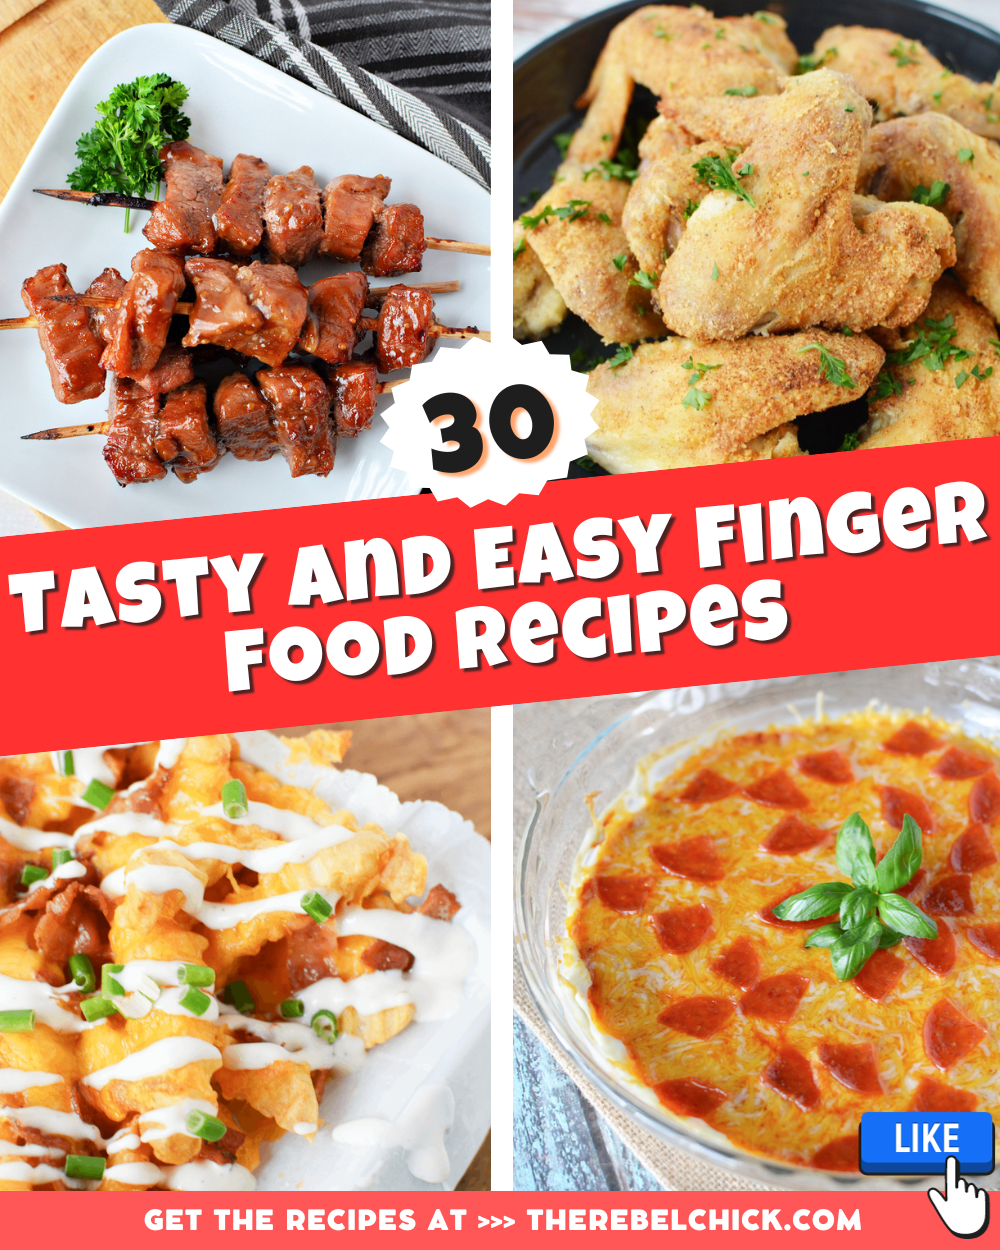 30 Tasty and Easy Finger Food Recipes